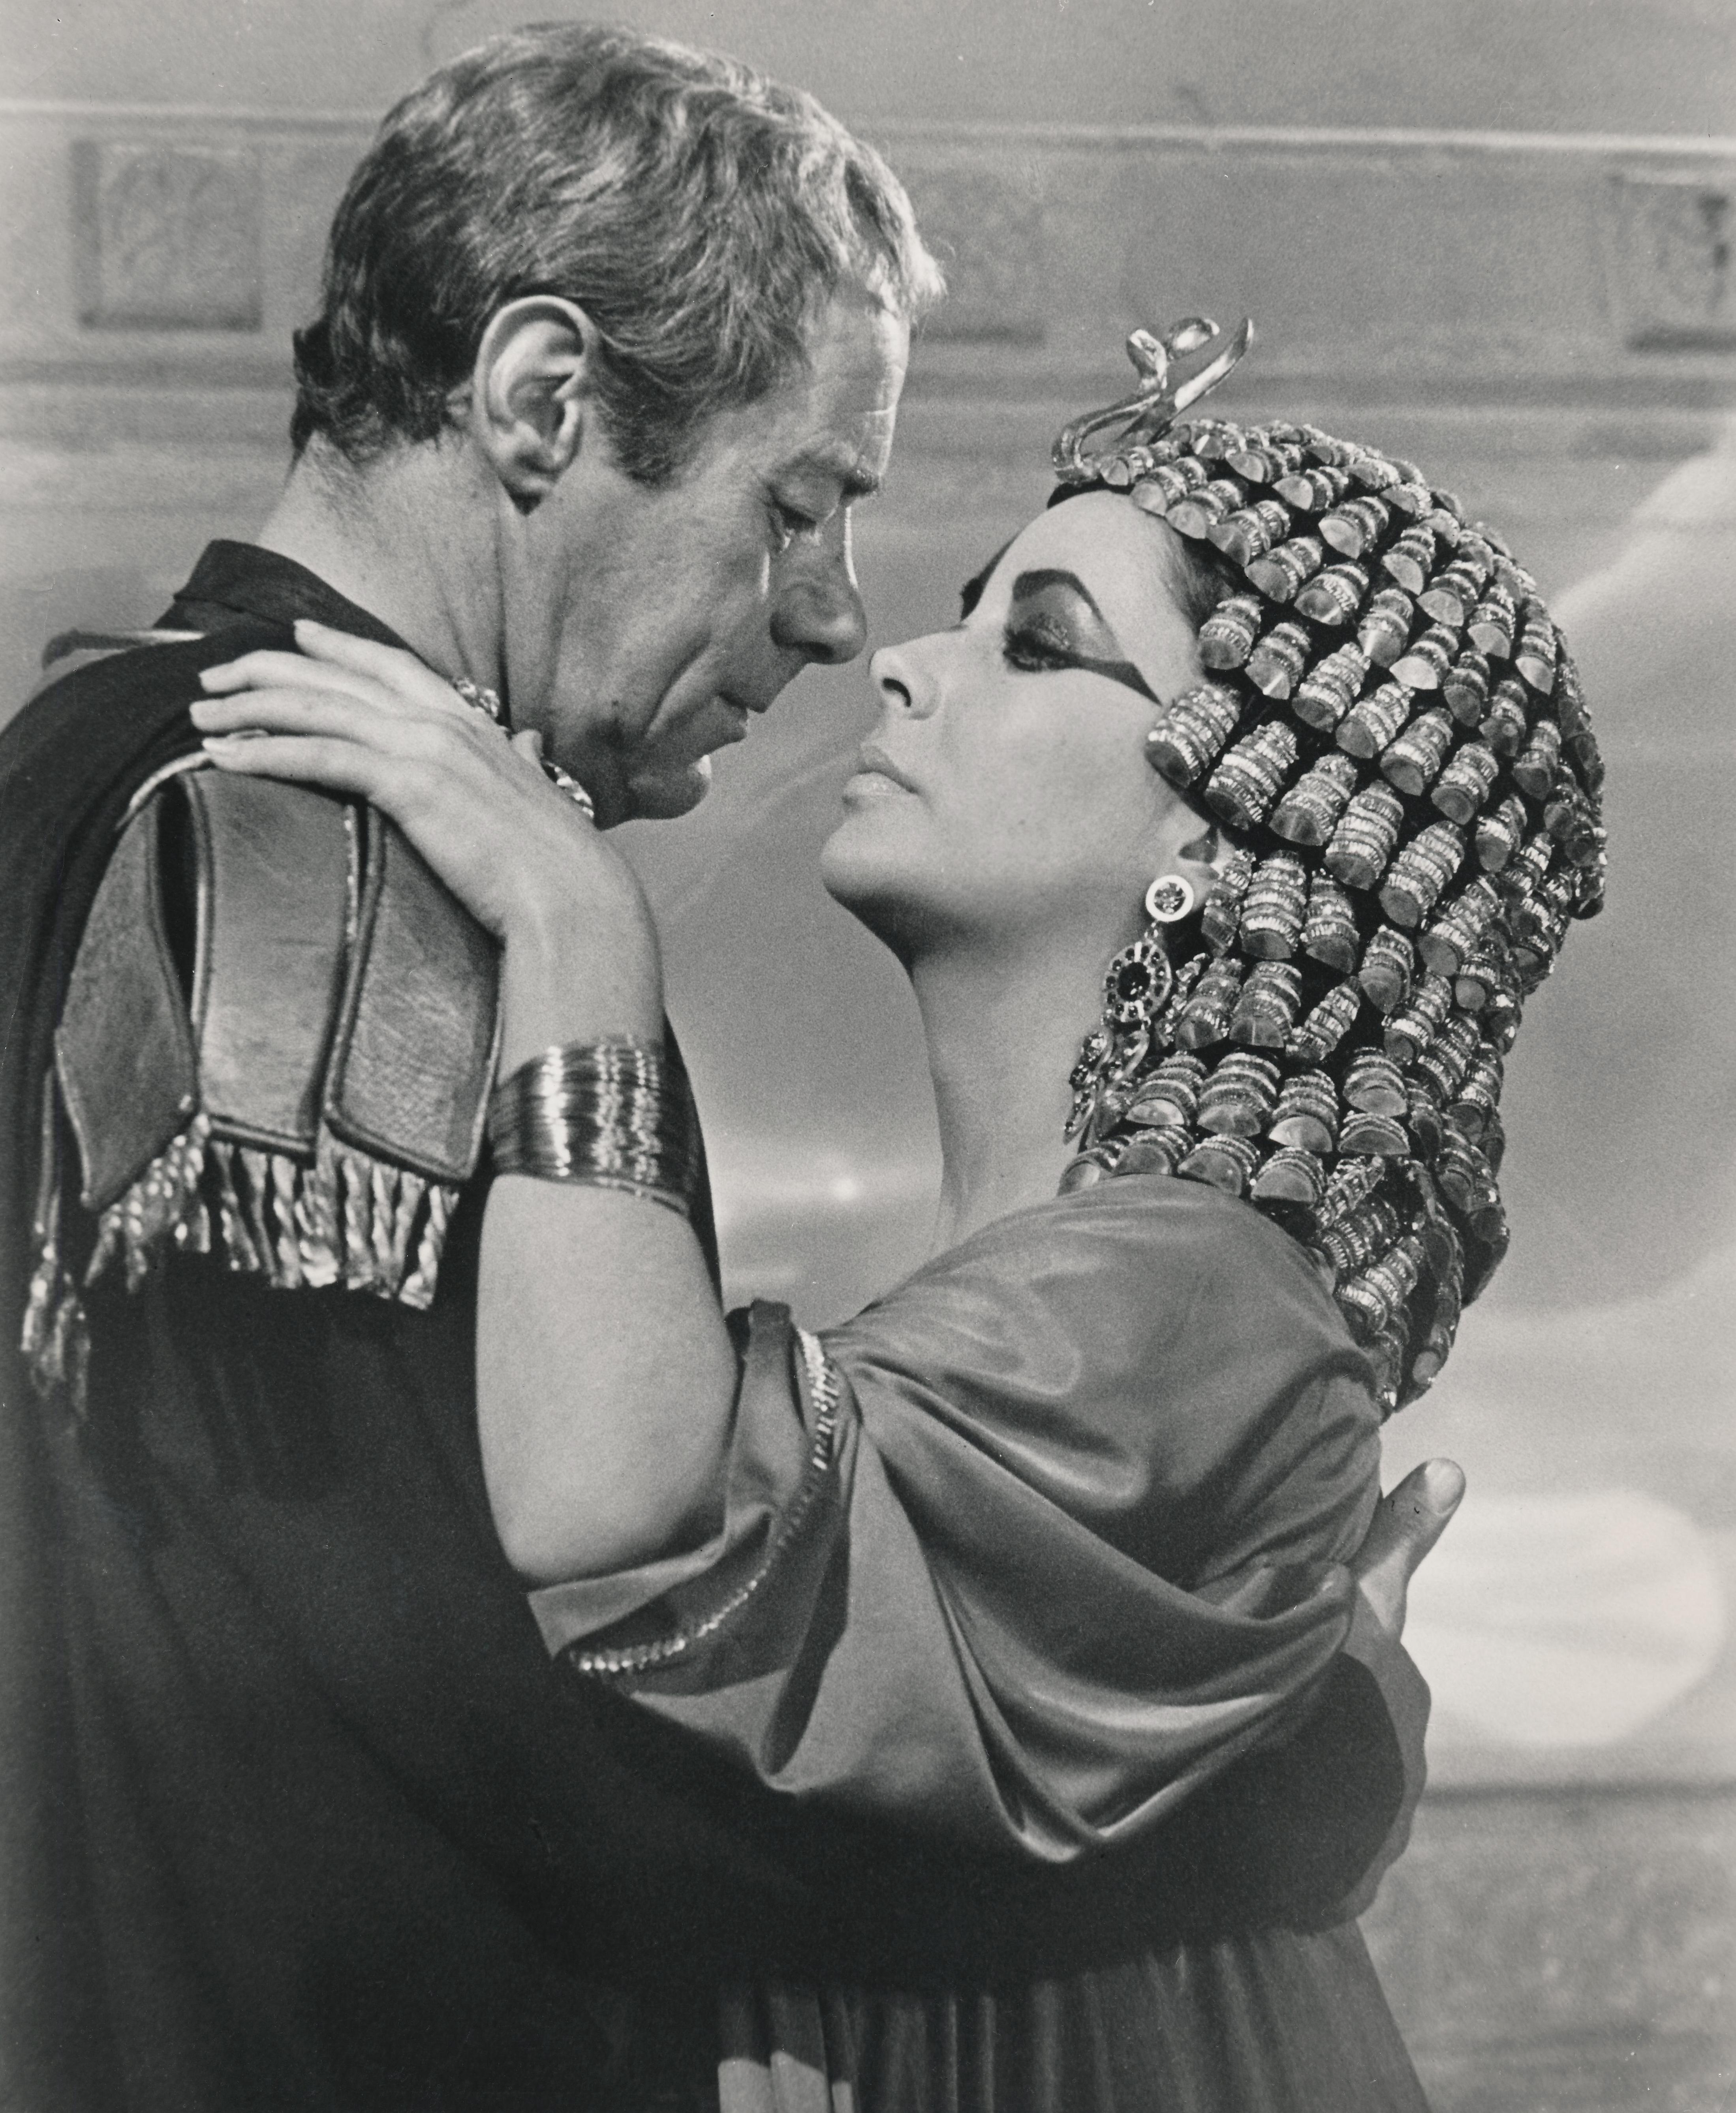 Unknown Portrait Photograph - Rex Harrison and Elizabeth Taylor Iconic Scene from "Cleopatra" Fine Art Print